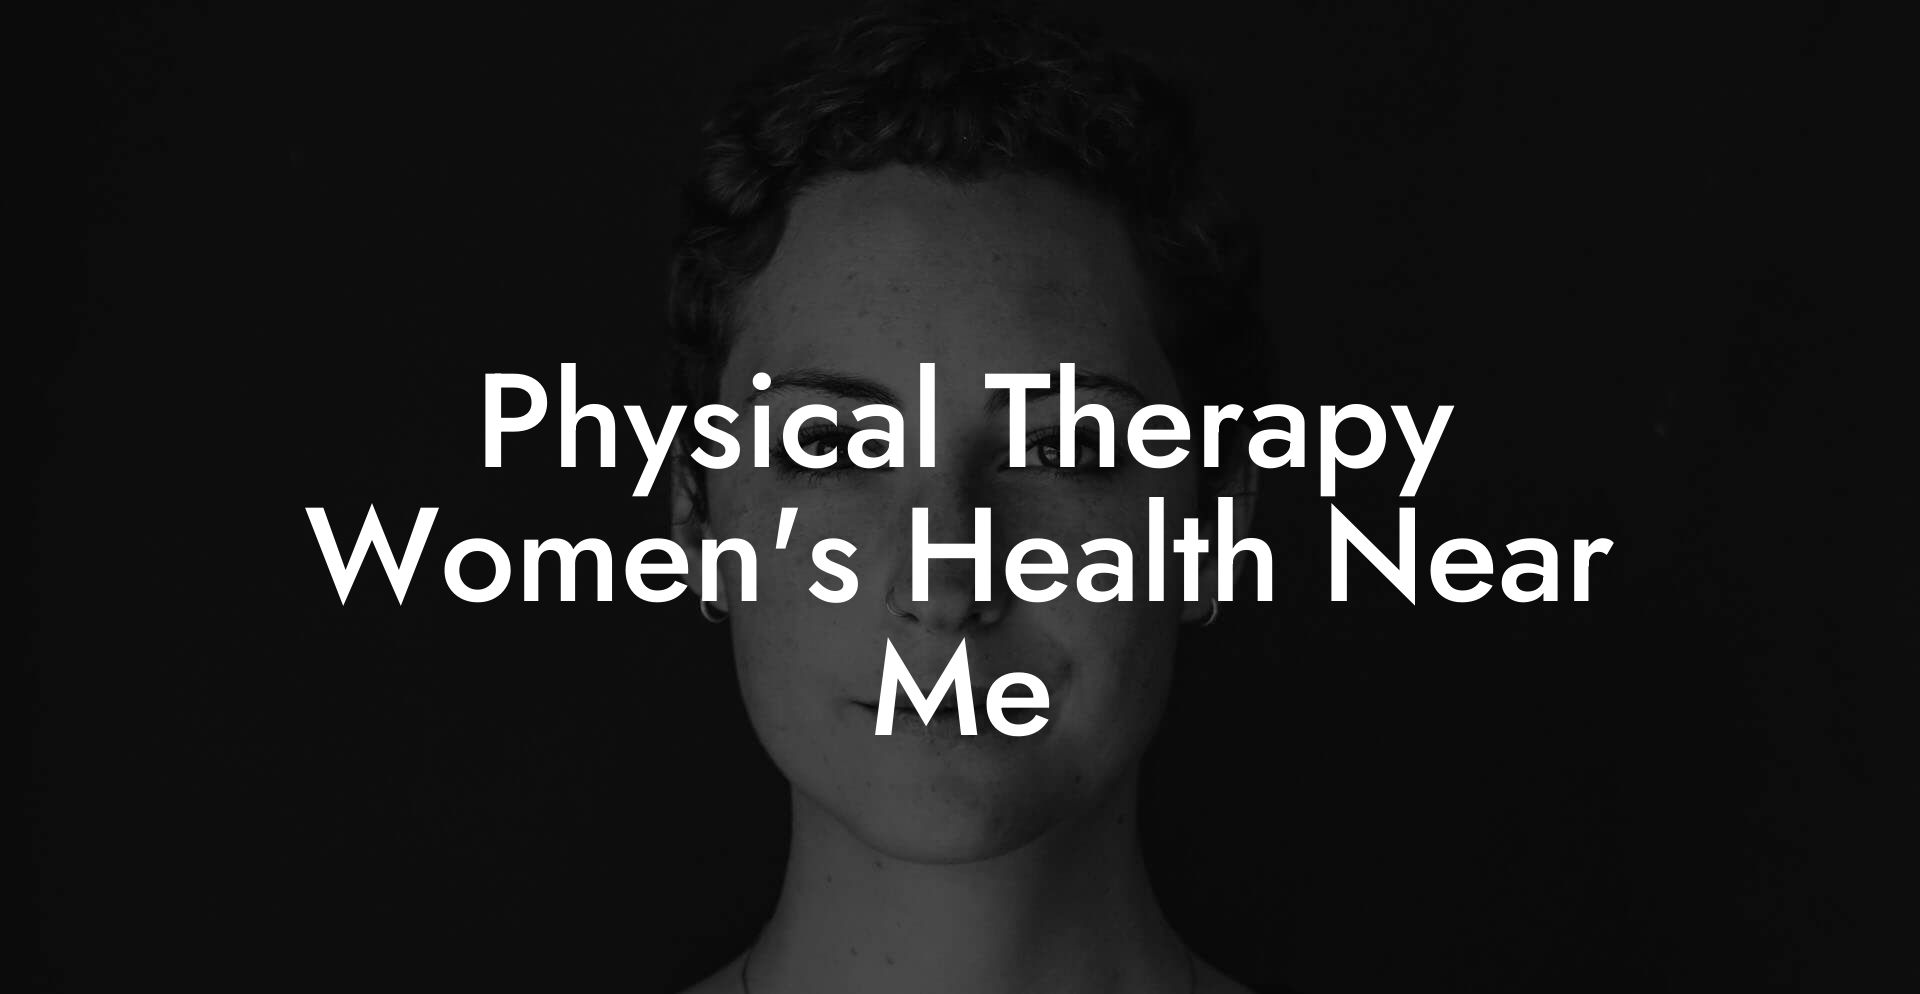 Physical Therapy Women's Health Near Me